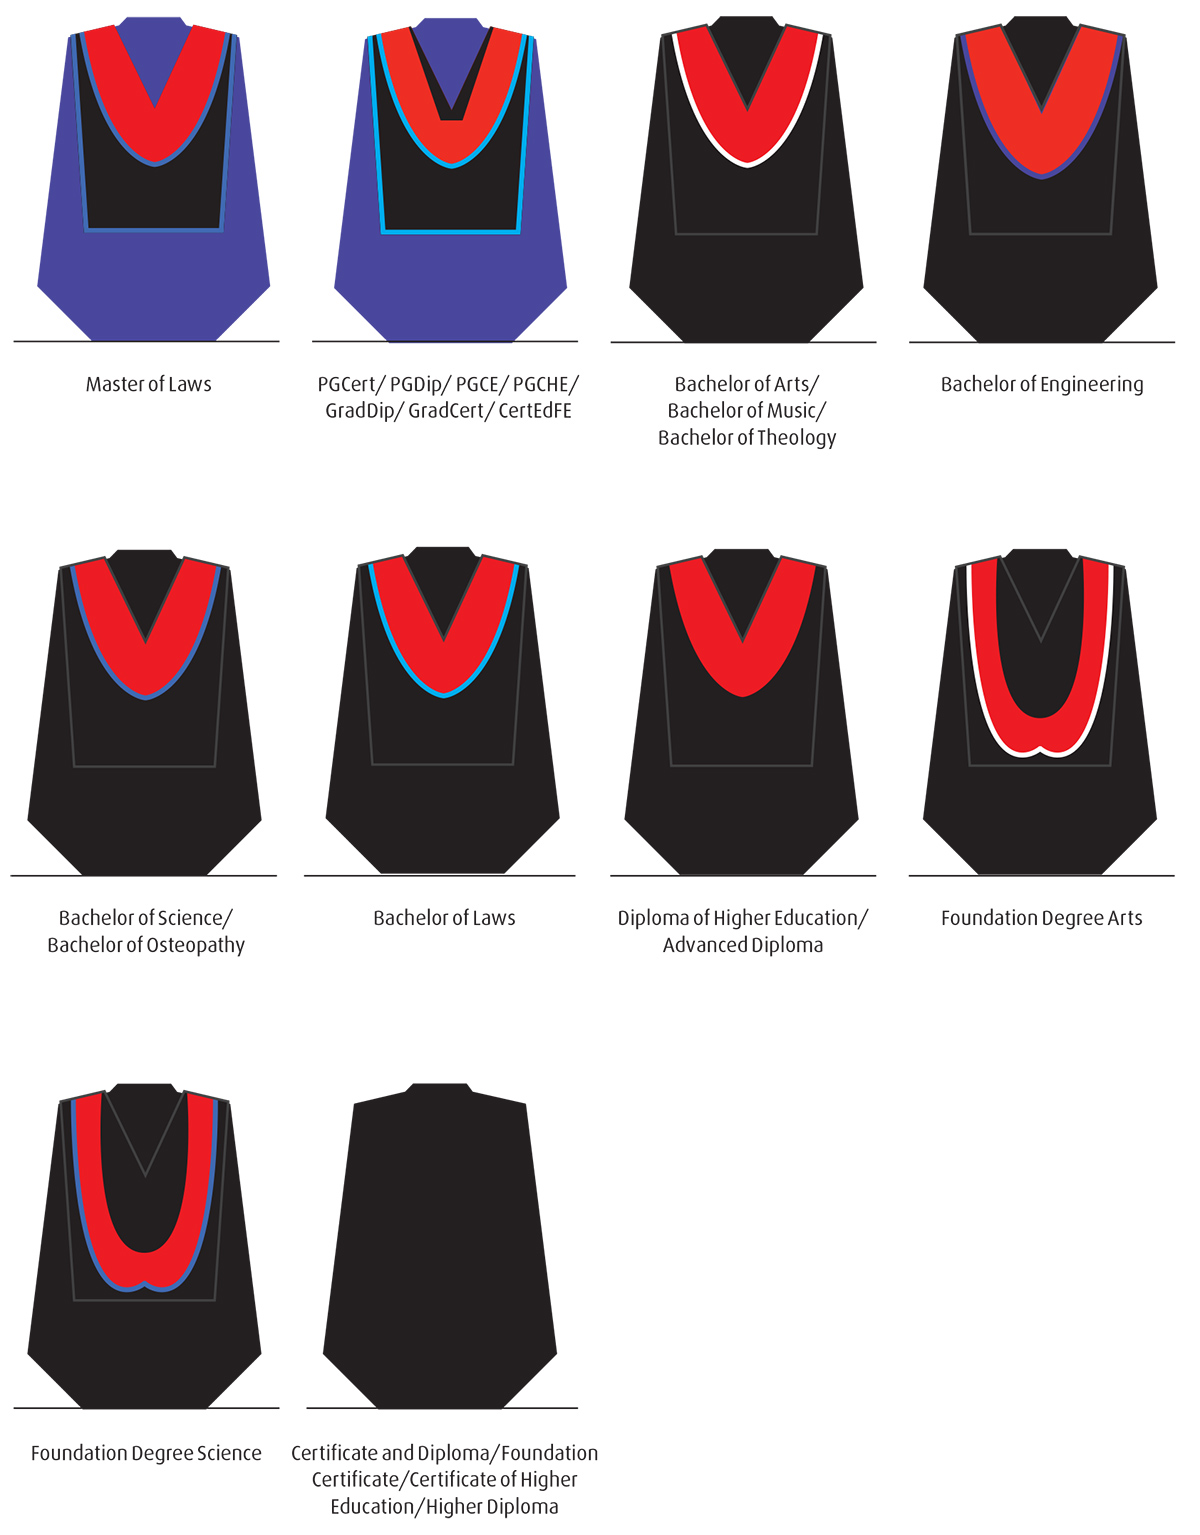 Another chart of the various academic dress